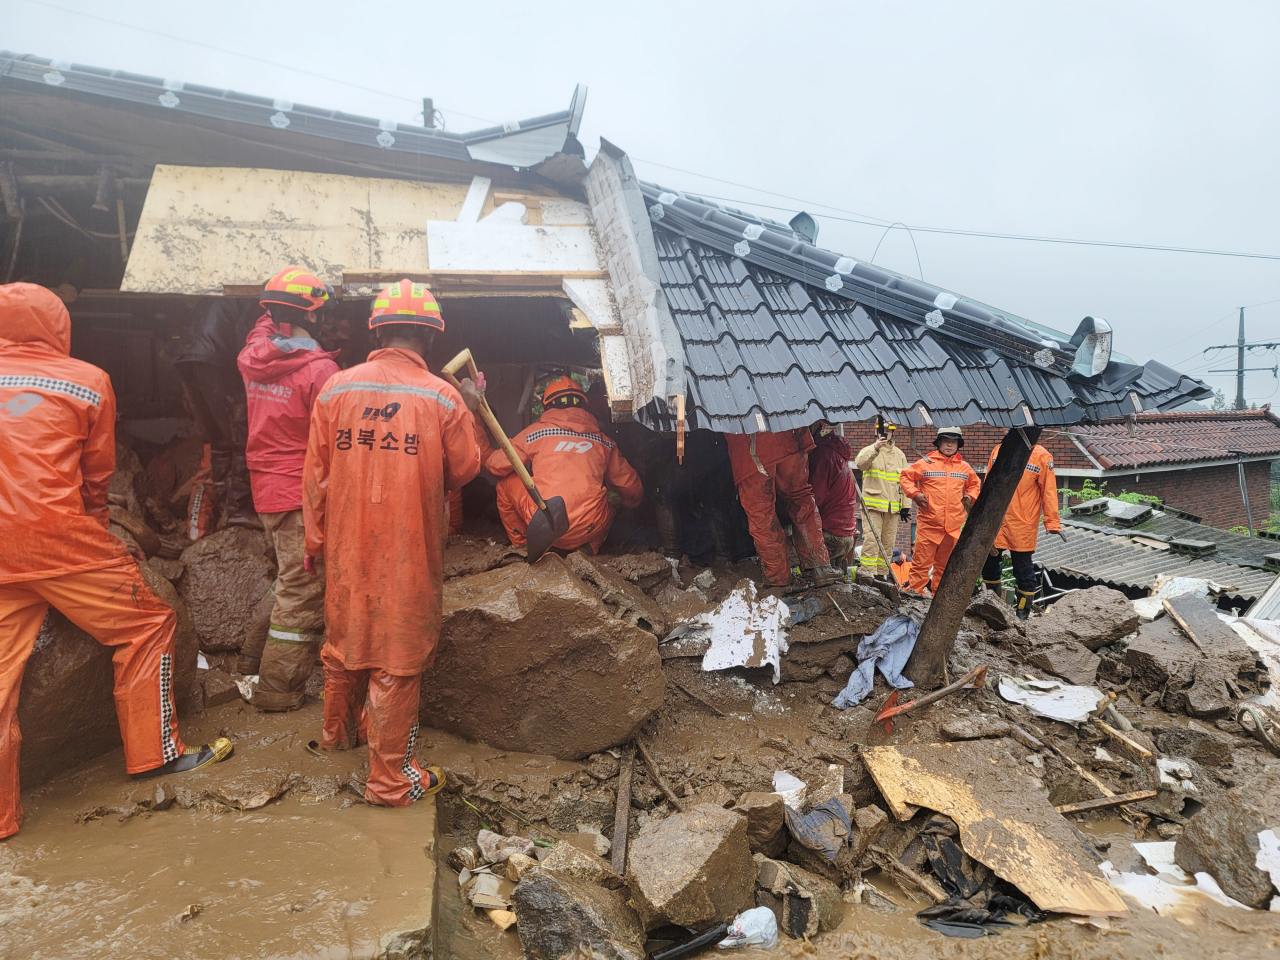 Firefighters carry out a rescue operation after a house was destroyed by landslides in Yeongju, North Gyeongsang Province, Saturday. (Yonhap) Firefighters carry out a rescue operation after a house was destroyed by landslides in Yeongju, North Gyeongsang Province, Saturday. (Yonhap)